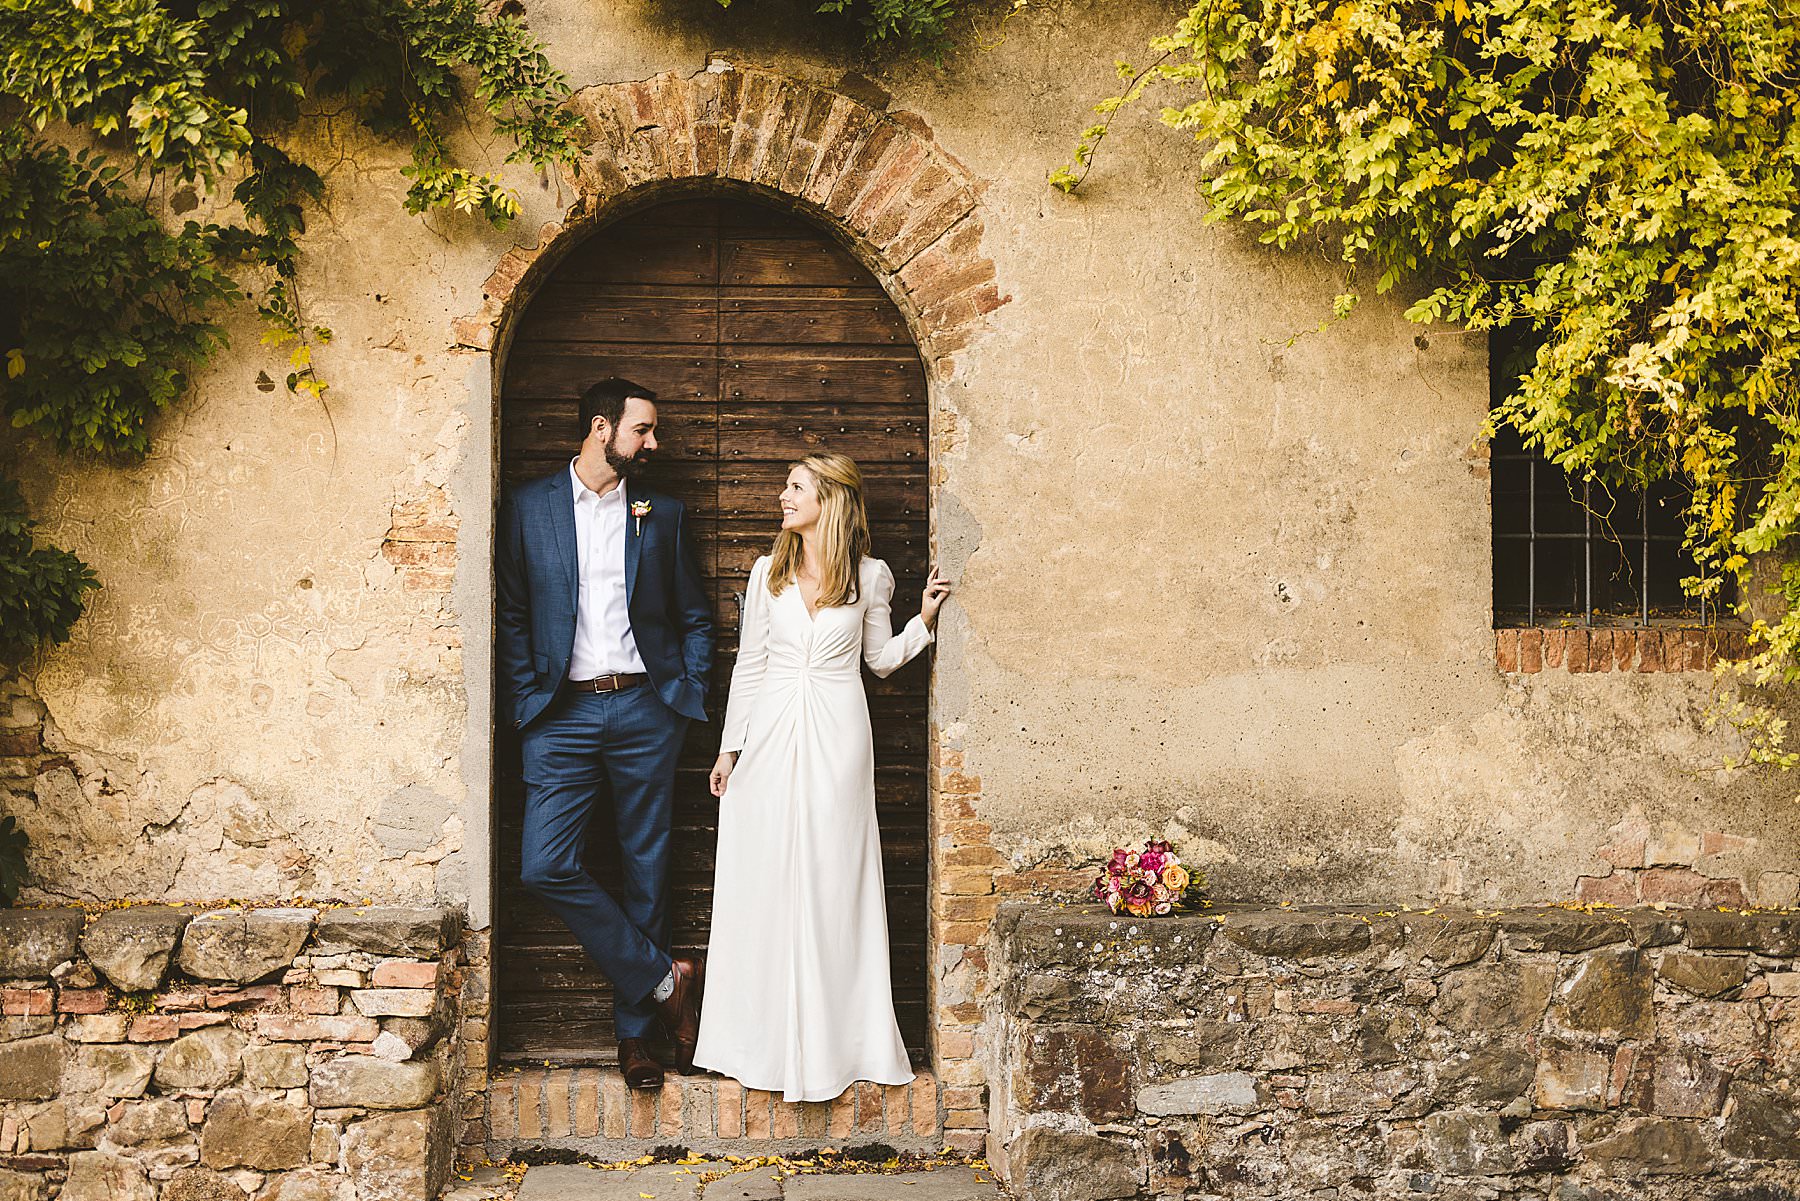 Lovely and classic elopement wedding photo shoot in Tuscany near Montalcino at Conti Costanti wine estate